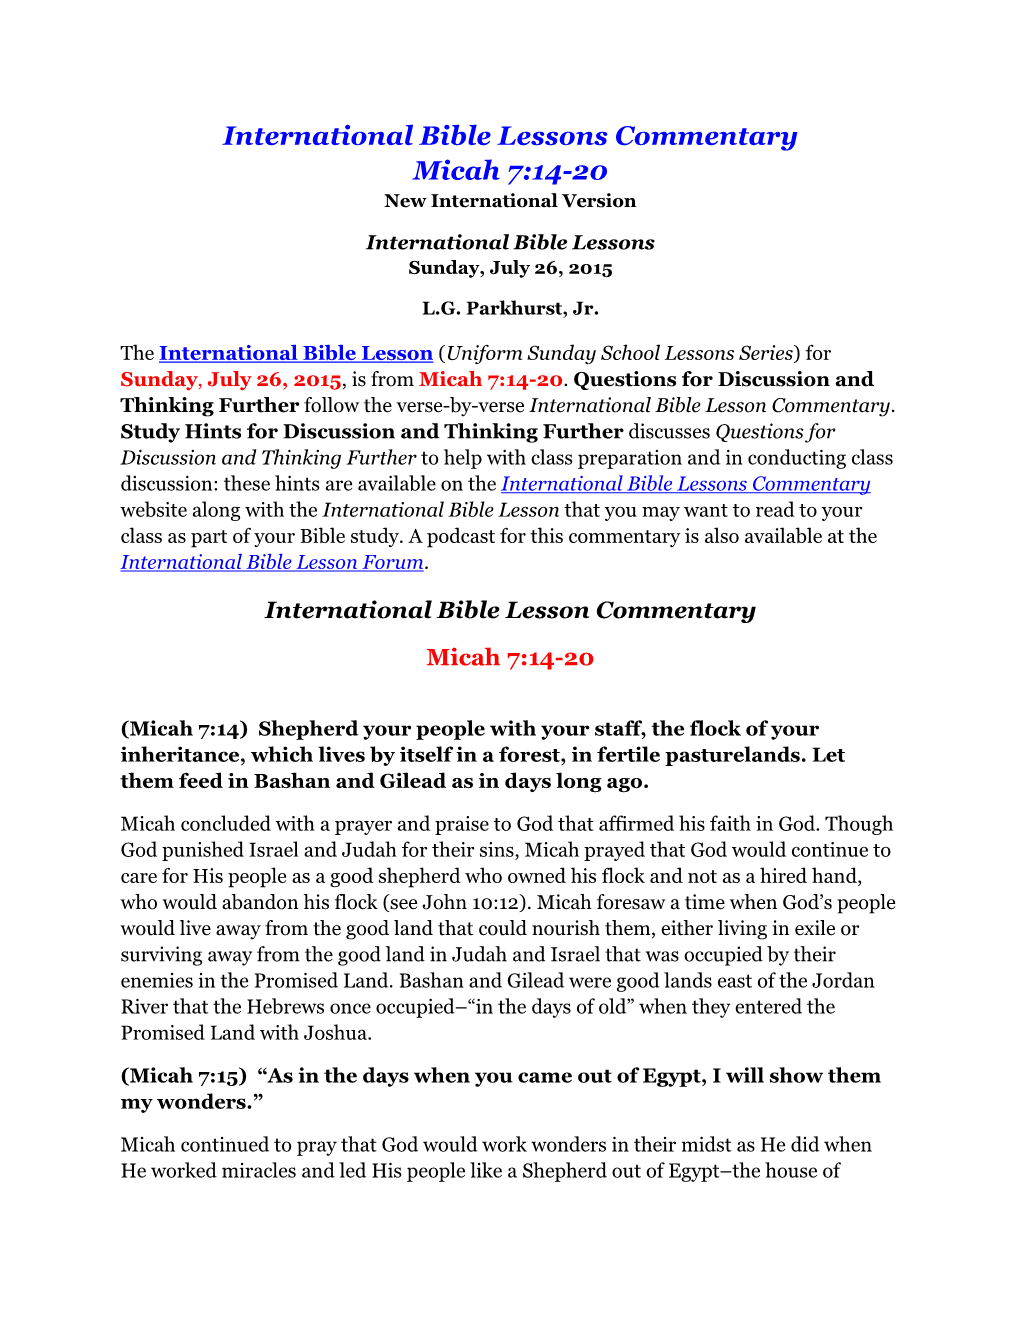 International Bible Lessons Commentary Micah 7:14-20 New International Version